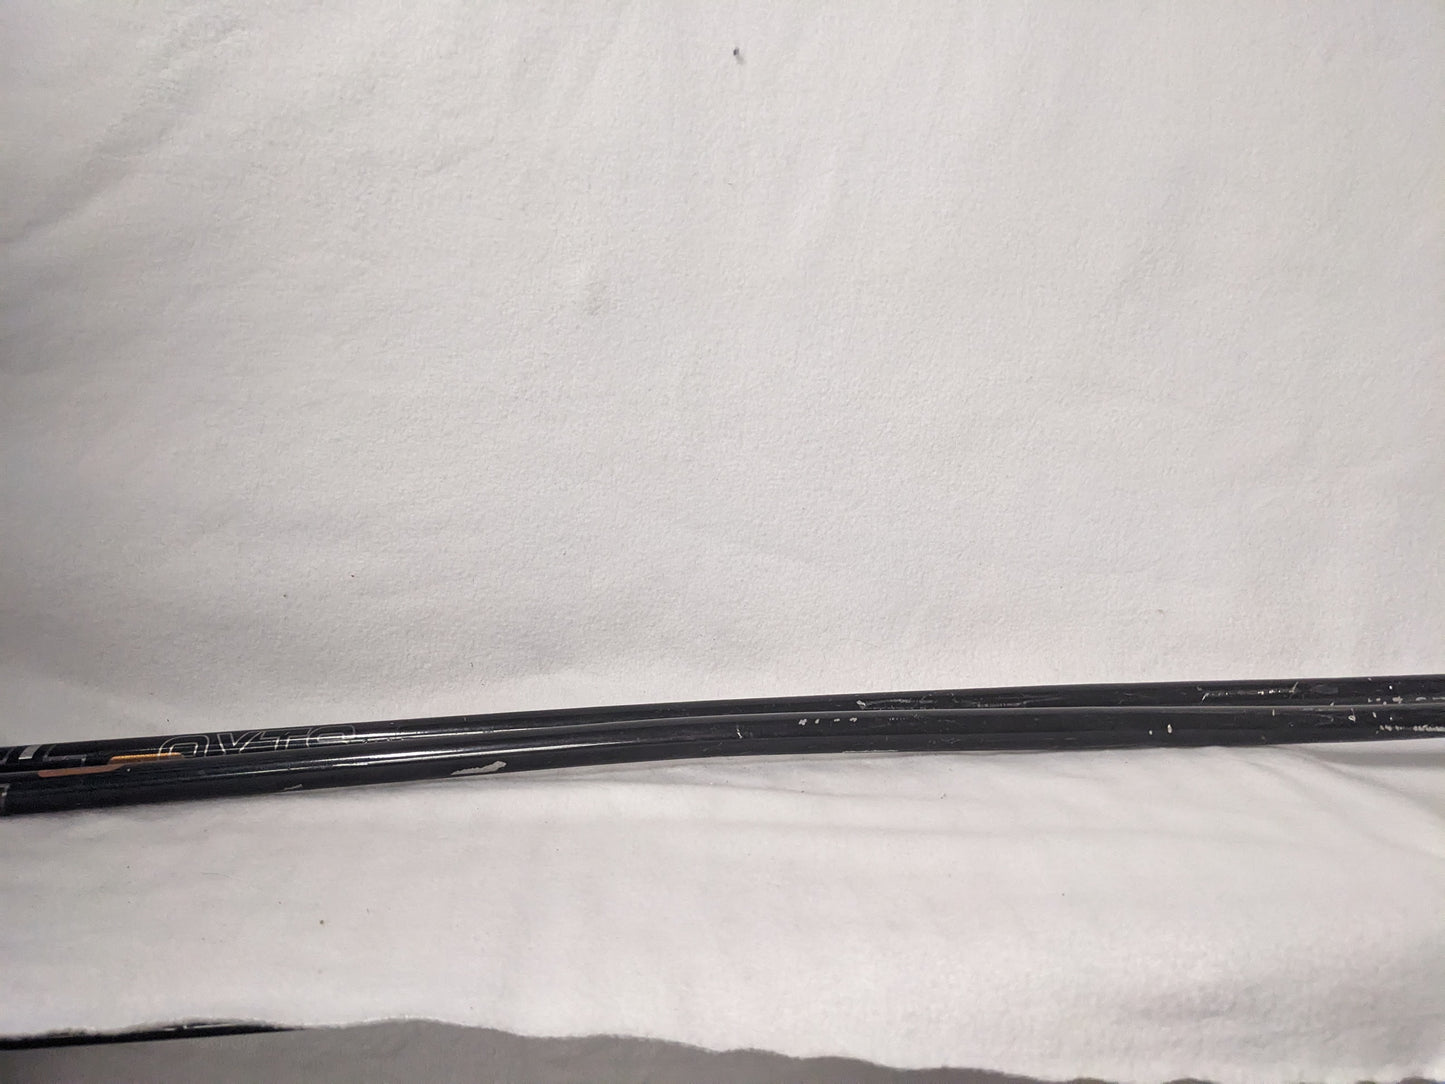 Scott Axis Ultralight Ski Poles Size 130 Cm Color Black Condition Used and Slightly Bent